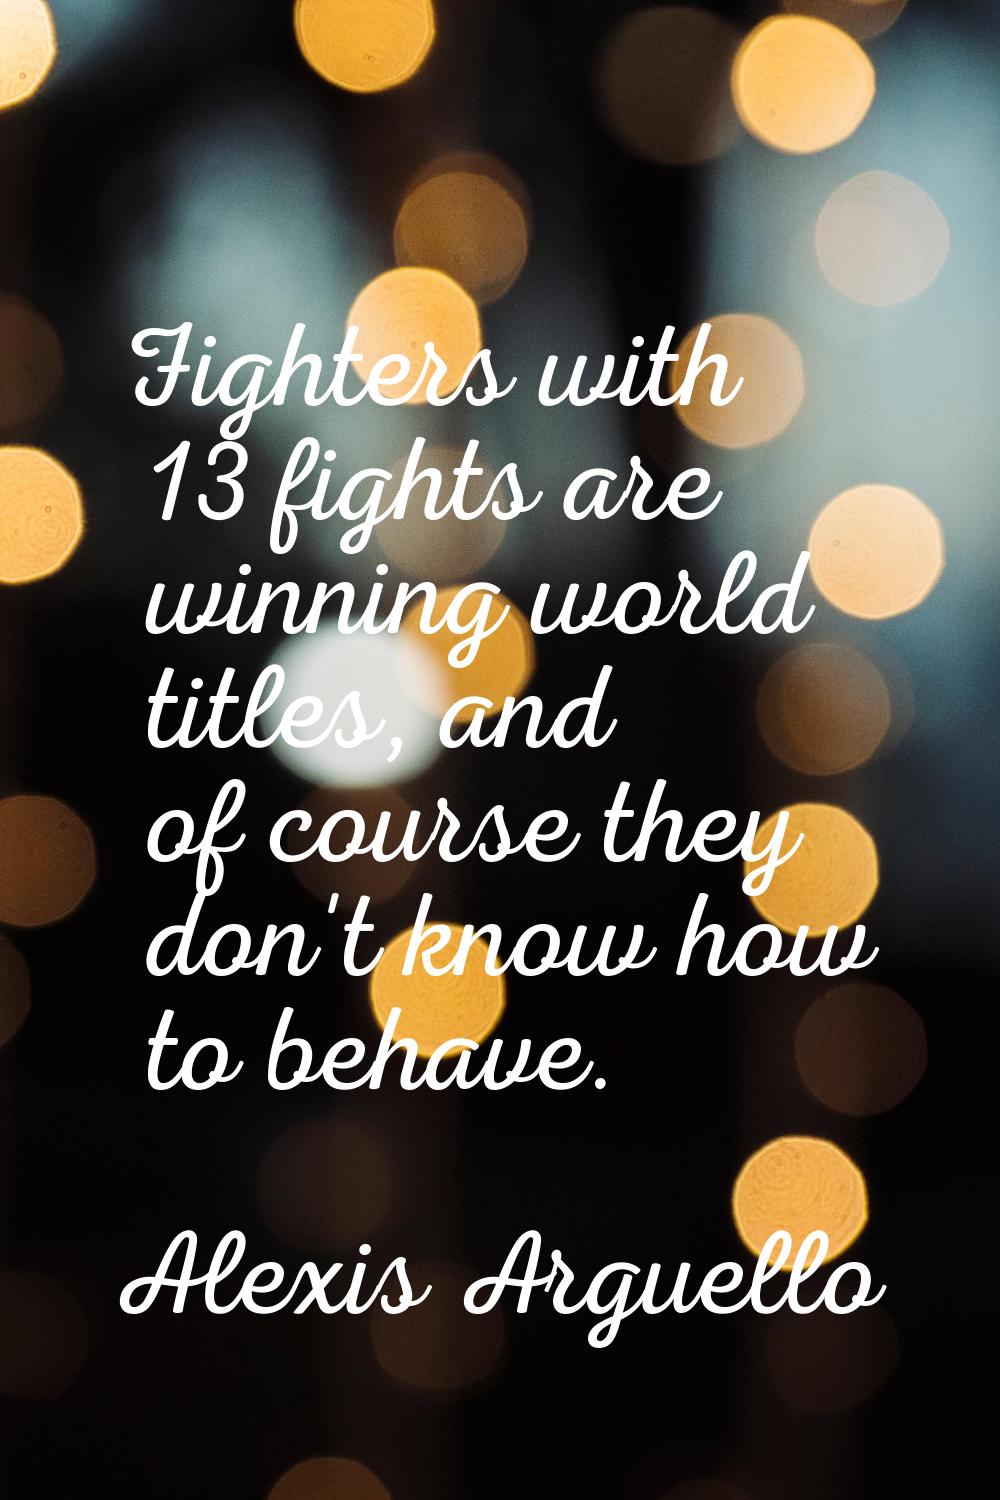 Fighters with 13 fights are winning world titles, and of course they don't know how to behave.